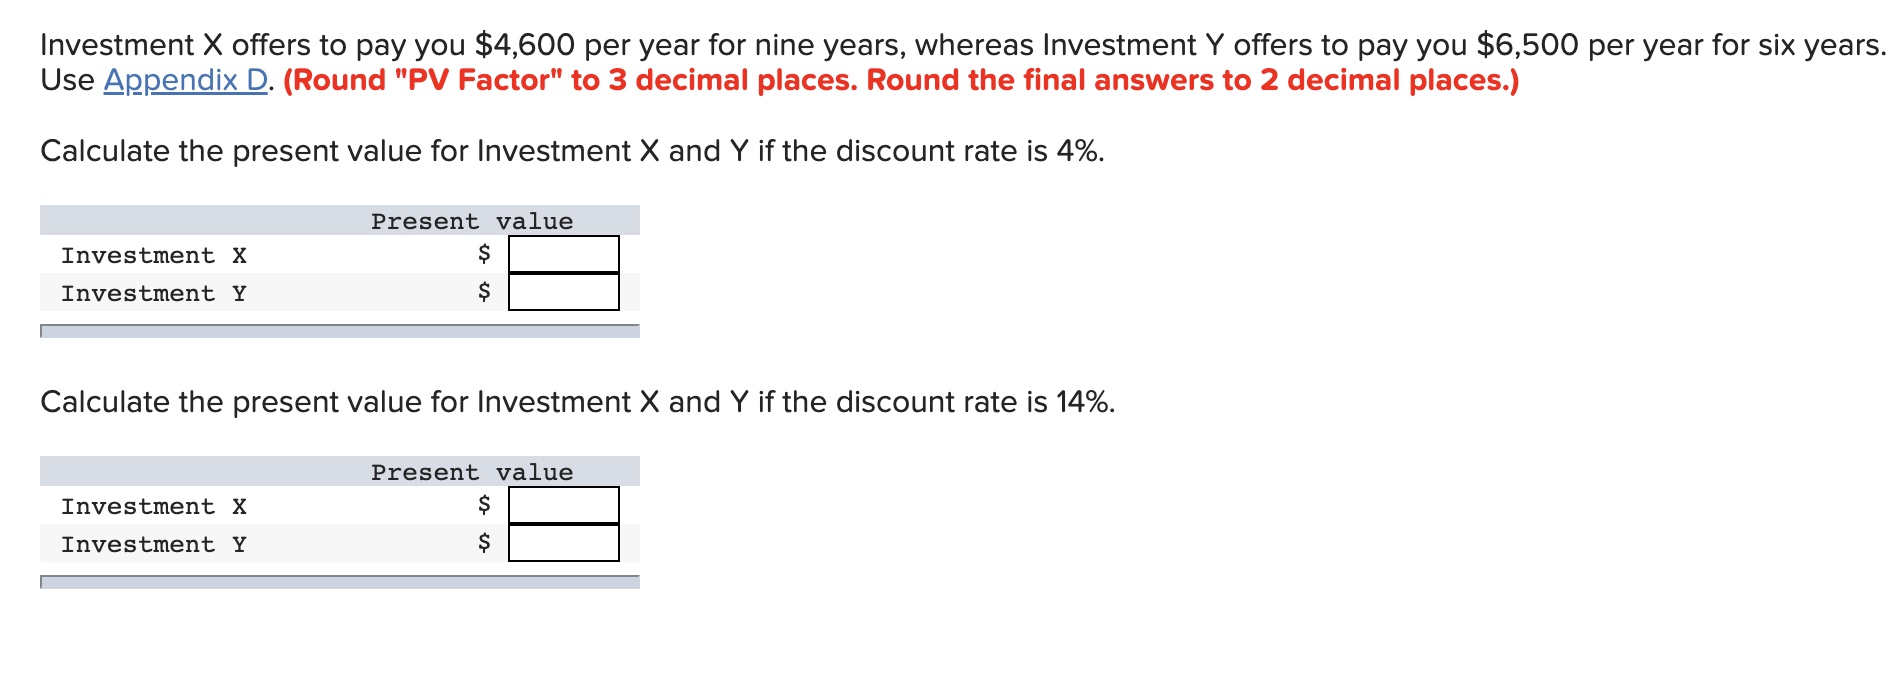 Investment X offers to pay you $4,600 per year for nine years, whereas Investment Y offers to pay you $6,500